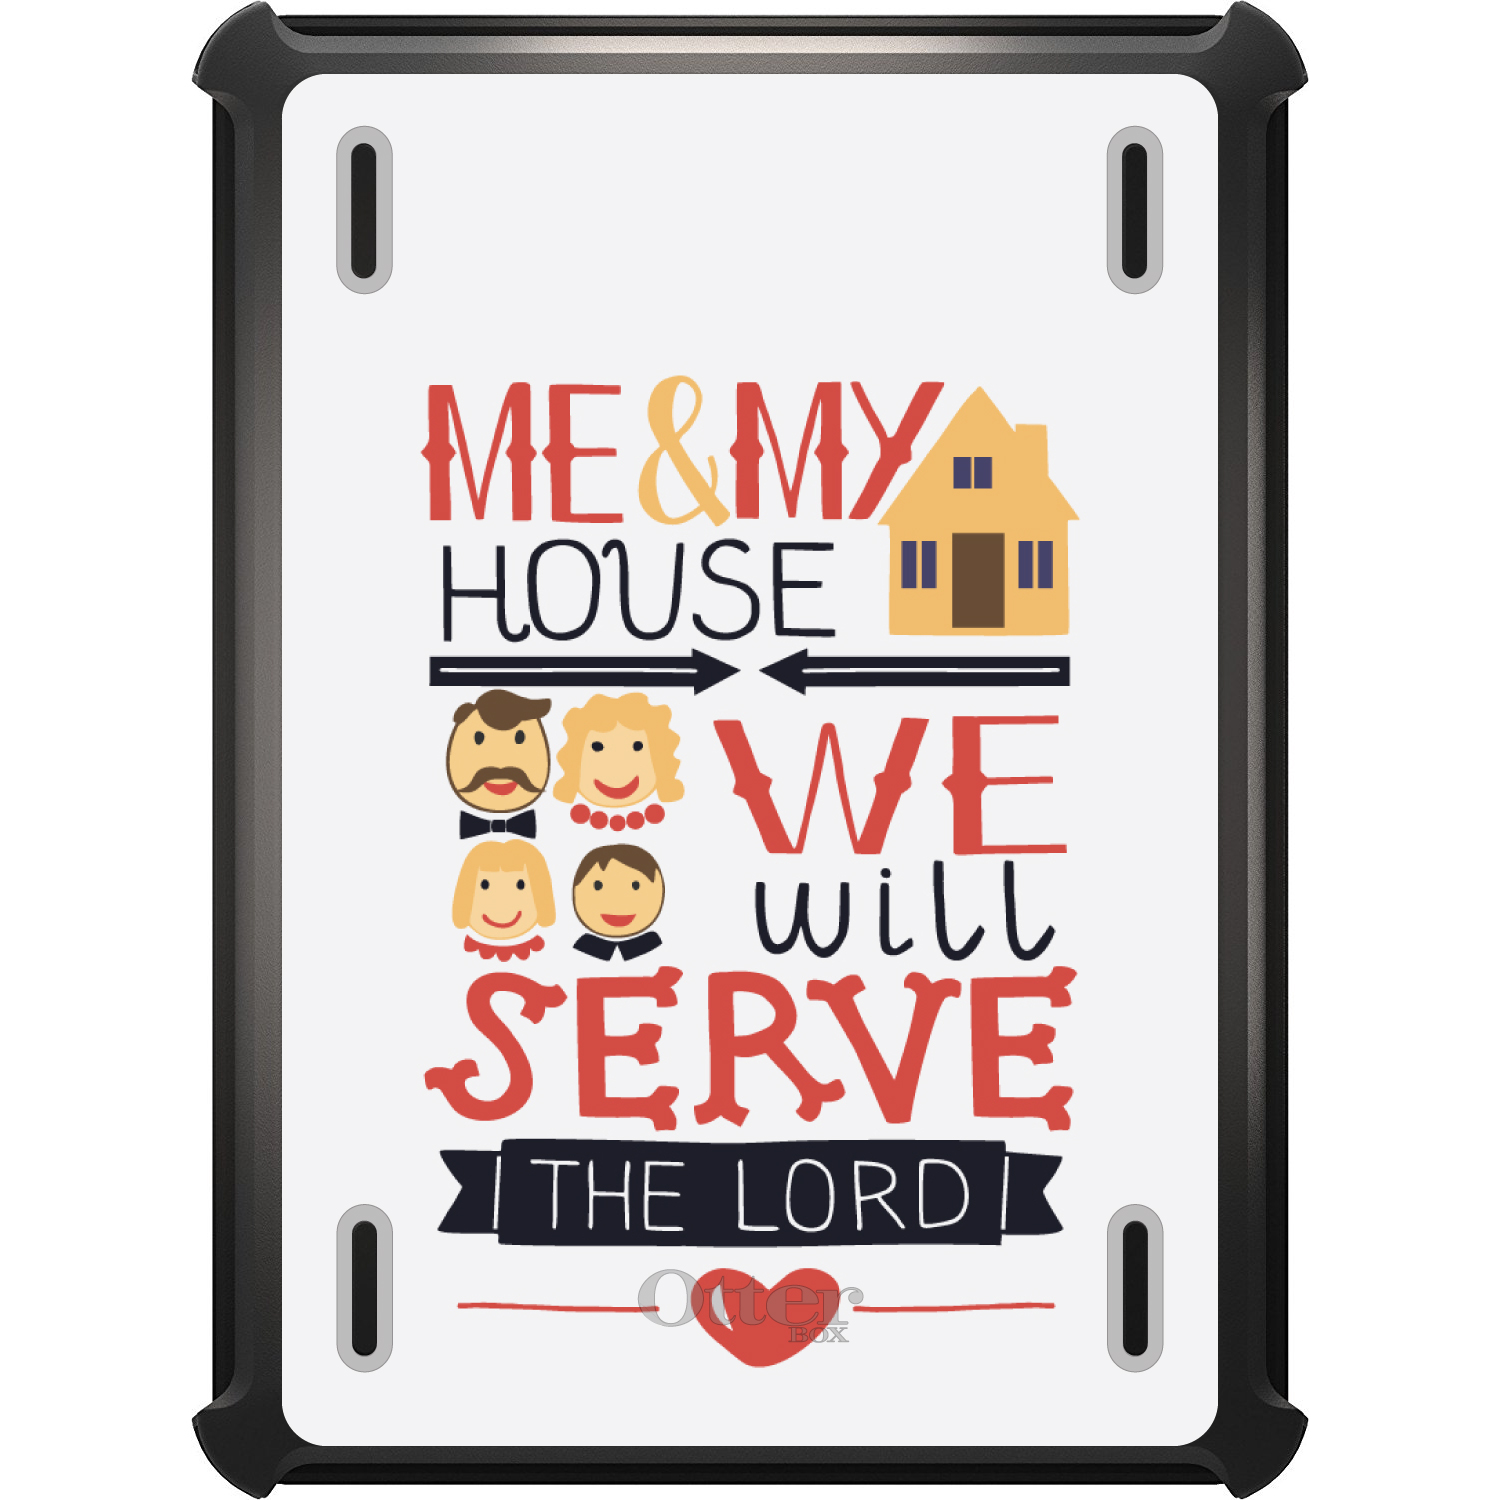 thumbnail 2 - OtterBox Defender for iPad Pro / Air / Mini - Me My House Will Serve the Lord